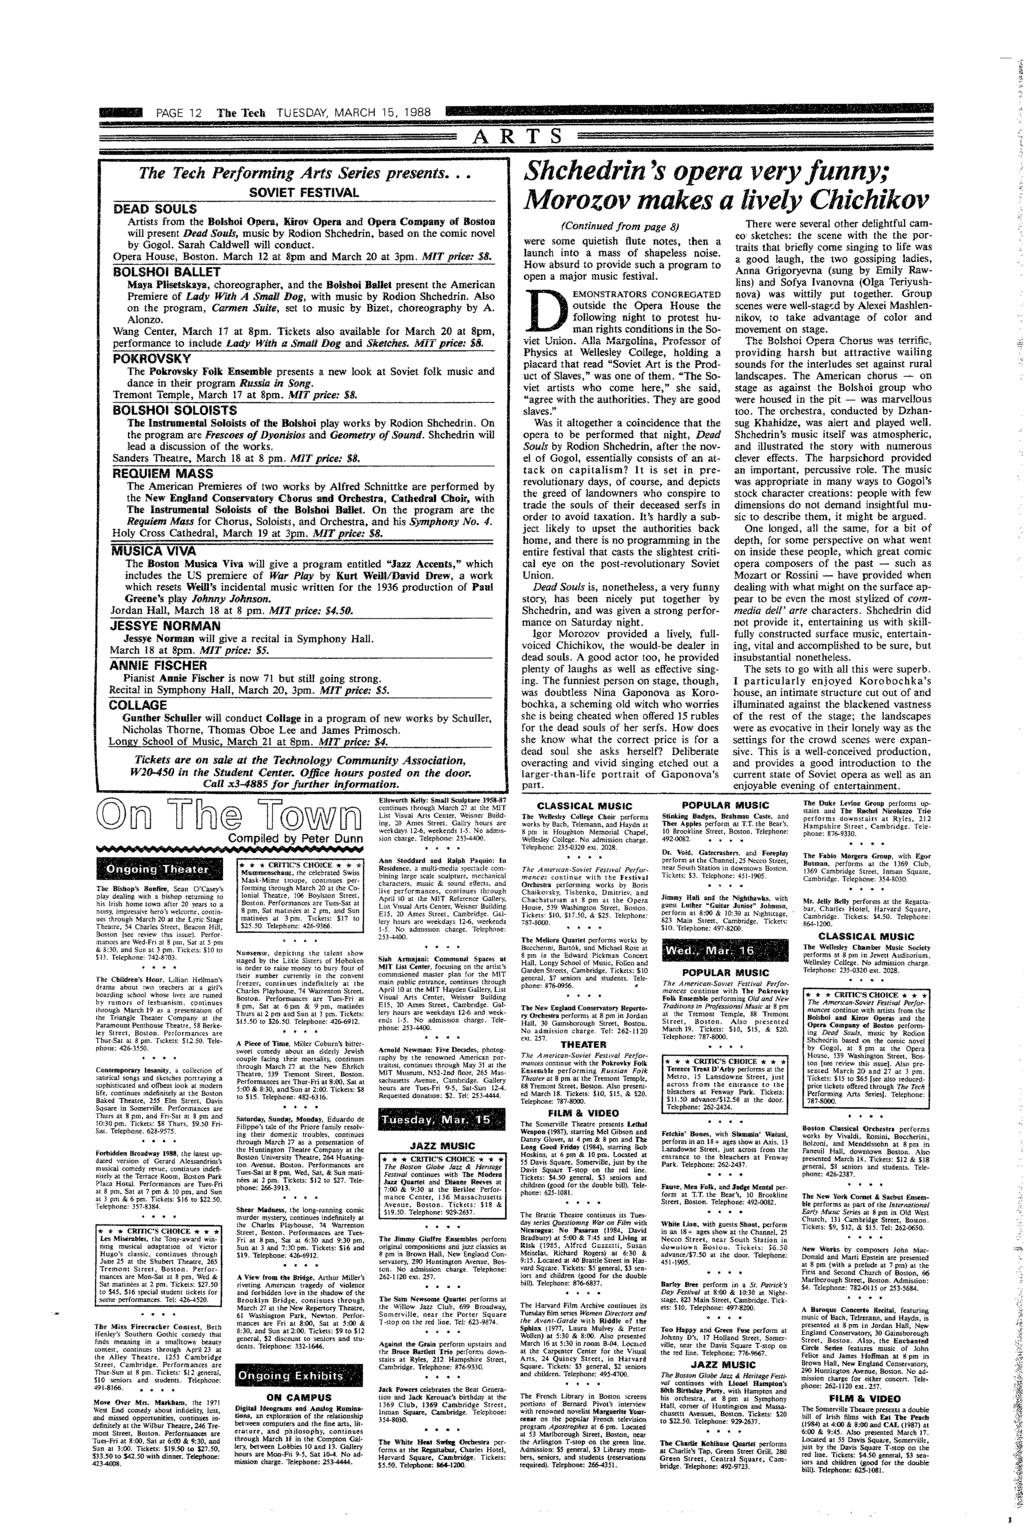 ~1 PAGE 12 The Tech TUESDAY. MARCH 15. 1988 Psssa --arsase.sgmrbl*pbbbssbesse 11- -- l-, - 1- --- 11-1. 1-1 ----. -_ 1-.`- m-r r--- - '- - -- ------ -- -- - -- --- -- _,,_ -- - -- -- 1.